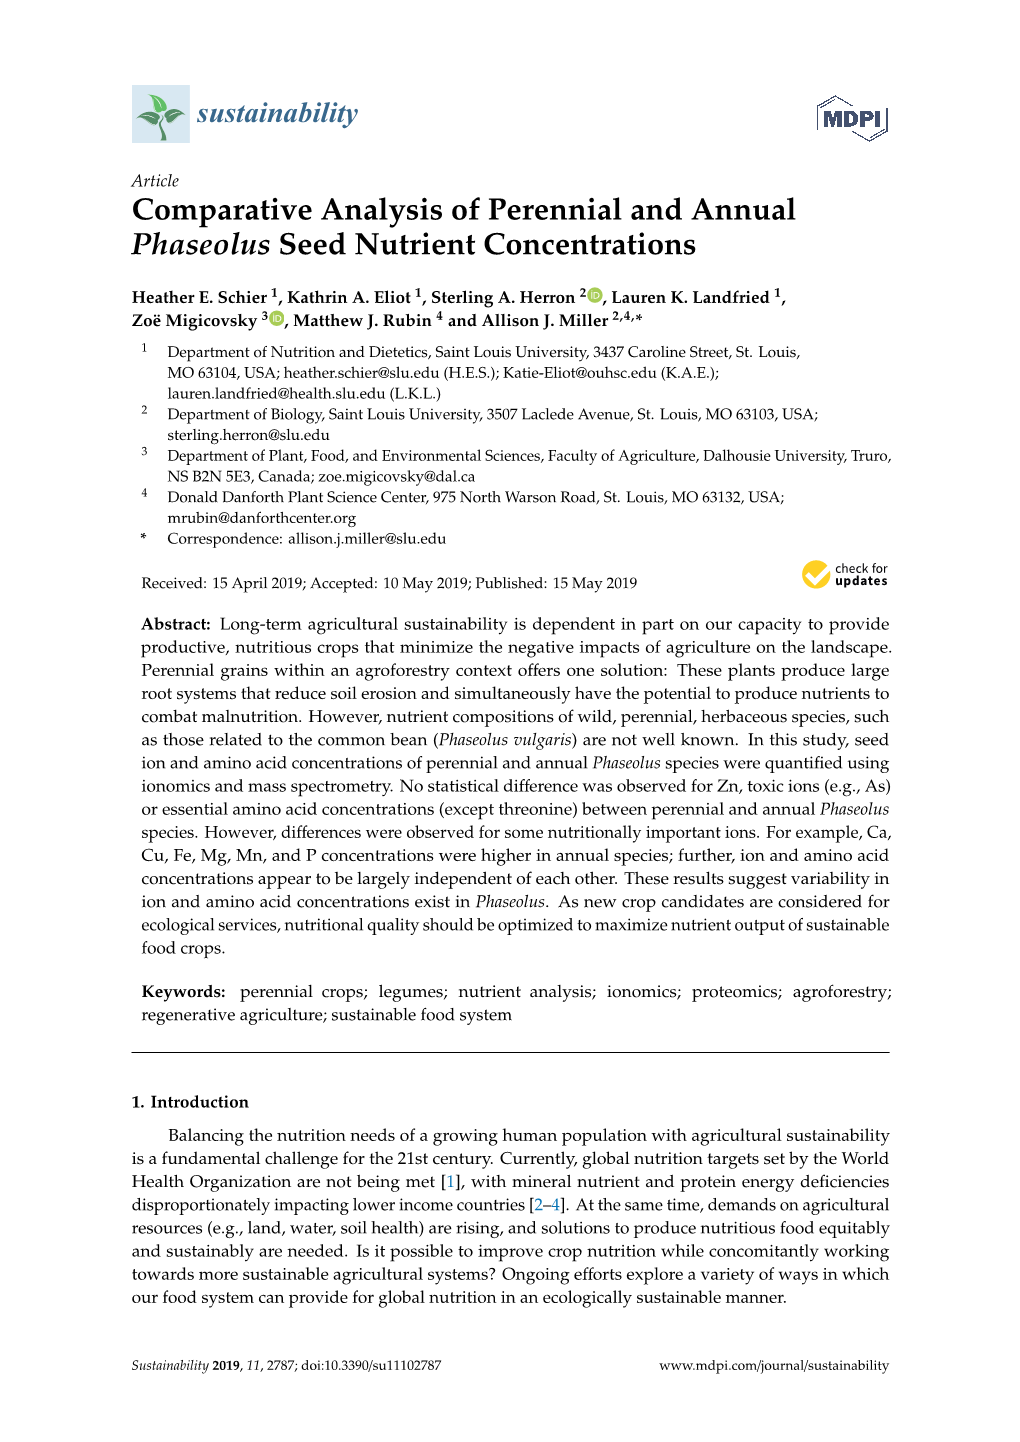 Comparative Analysis of Perennial and Annual Phaseolus Seed Nutrient Concentrations